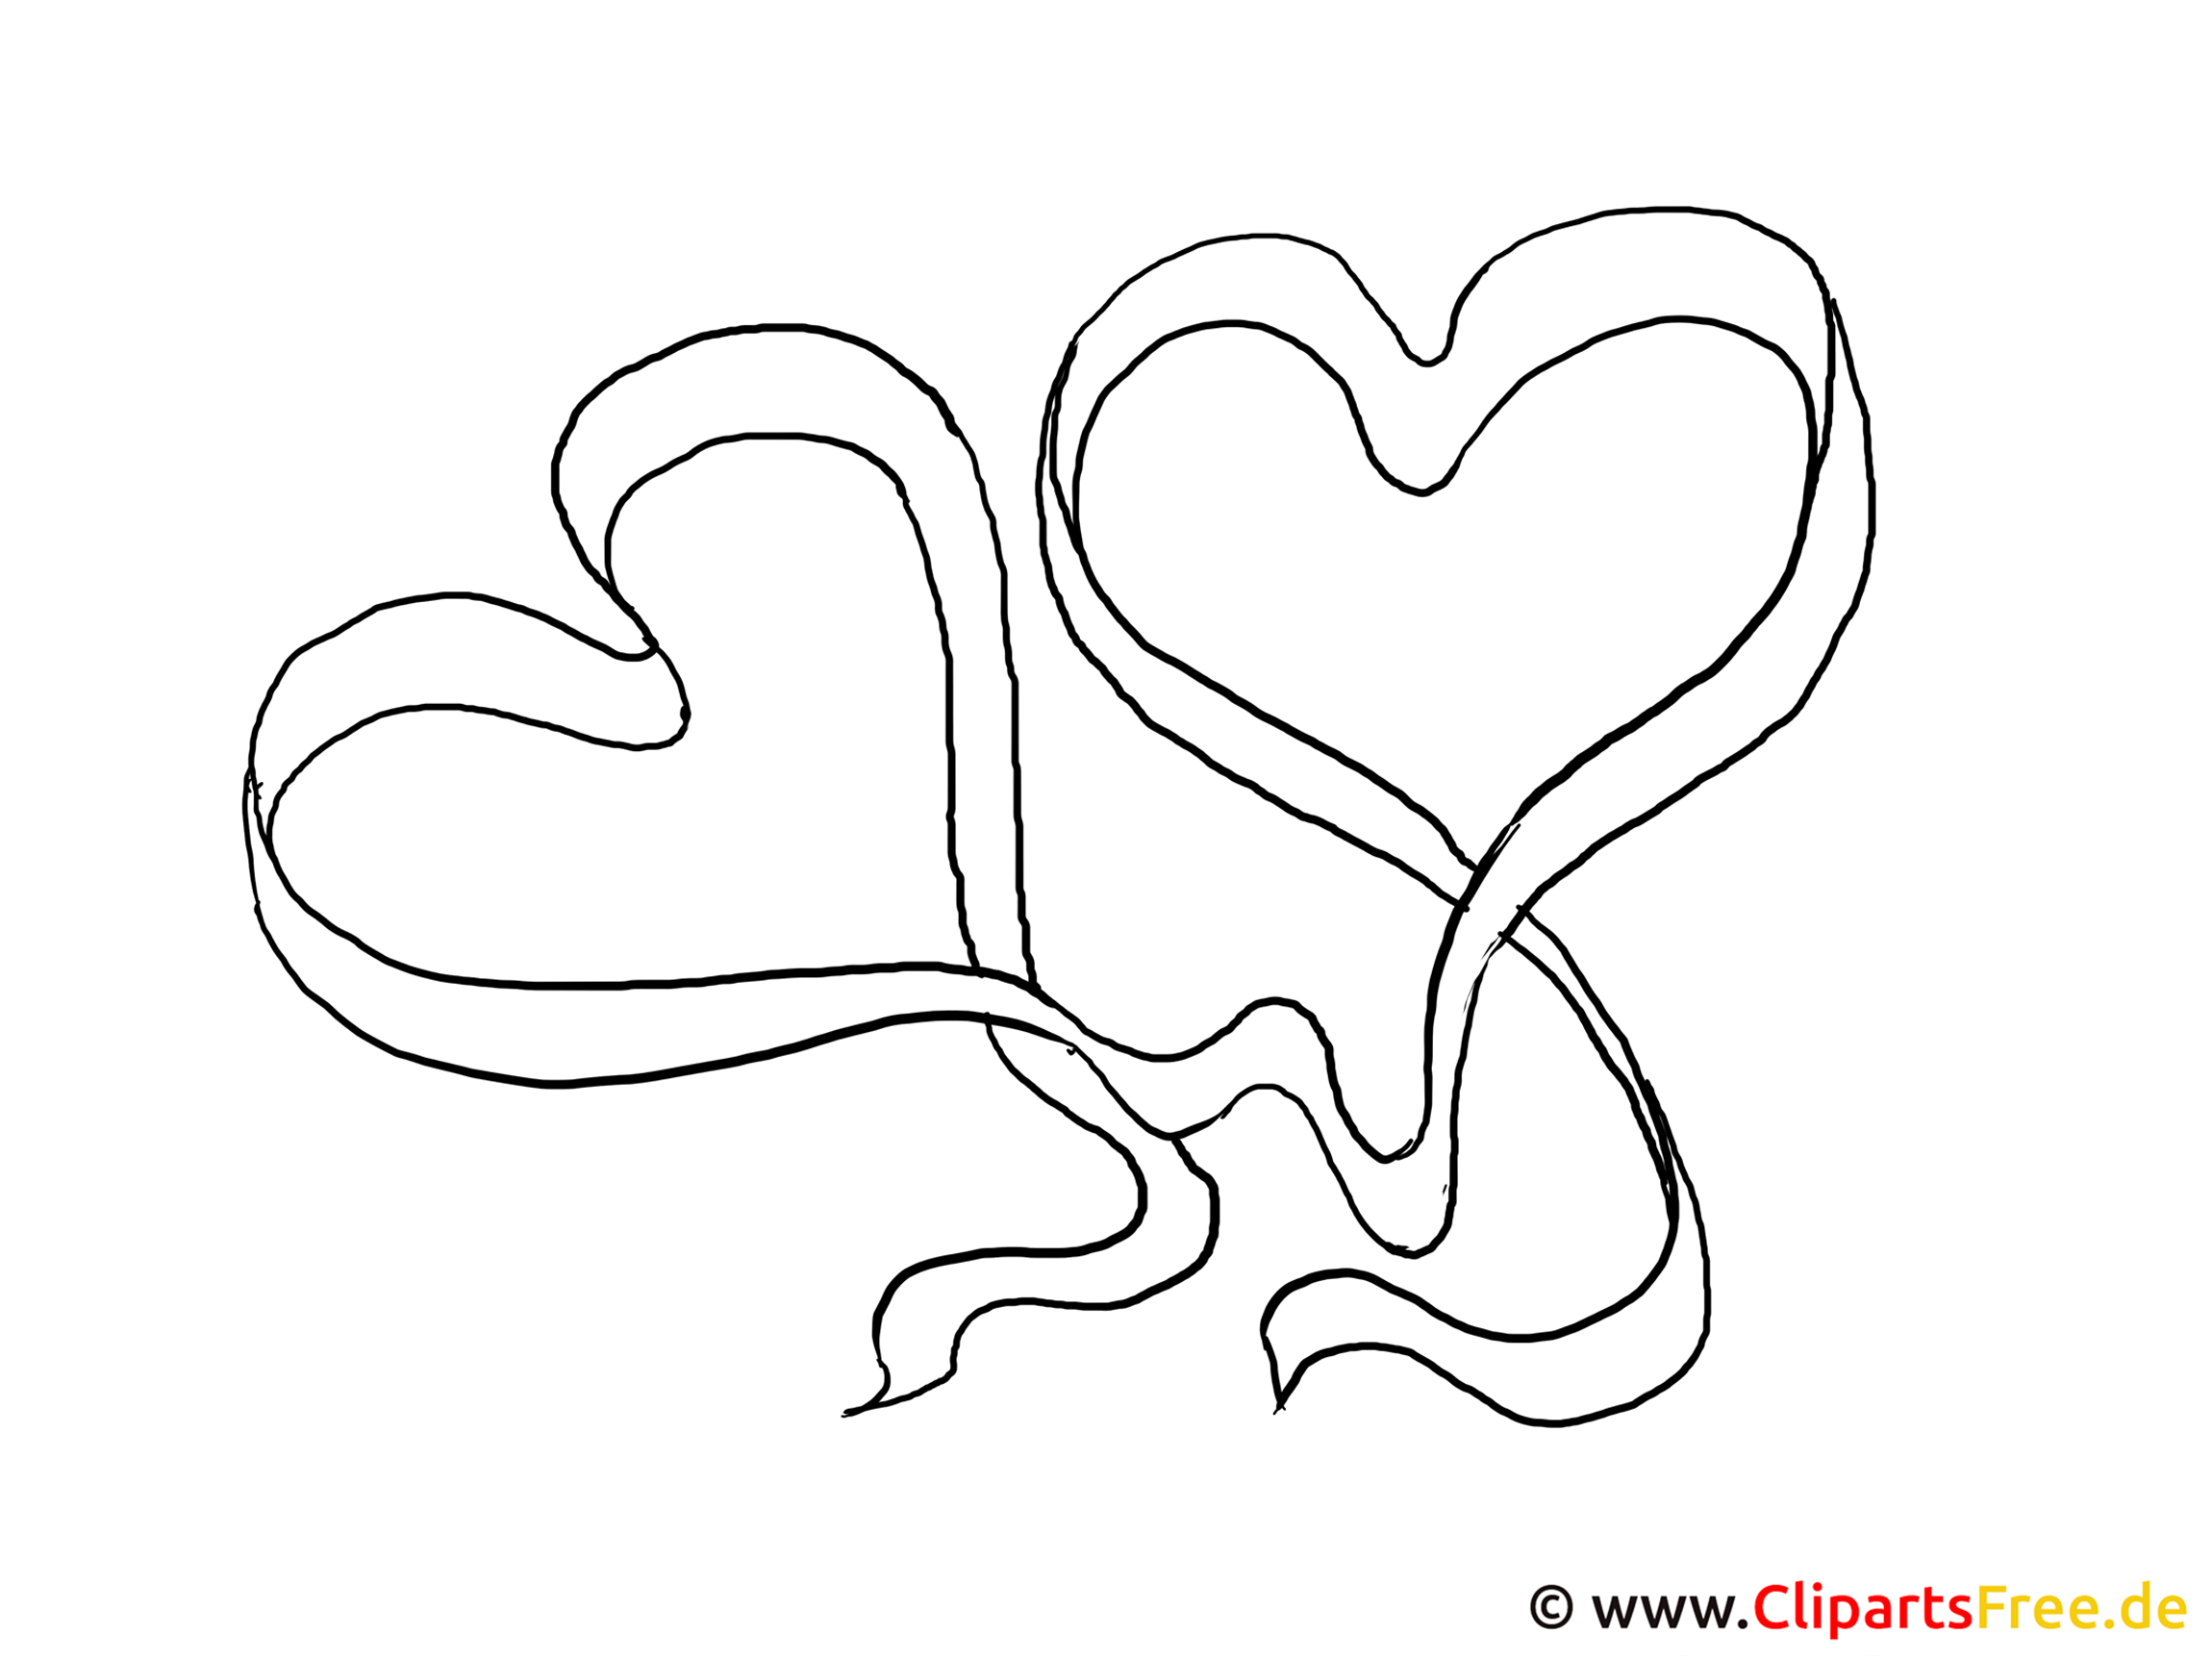 Coloring pictures heart - pictures for school